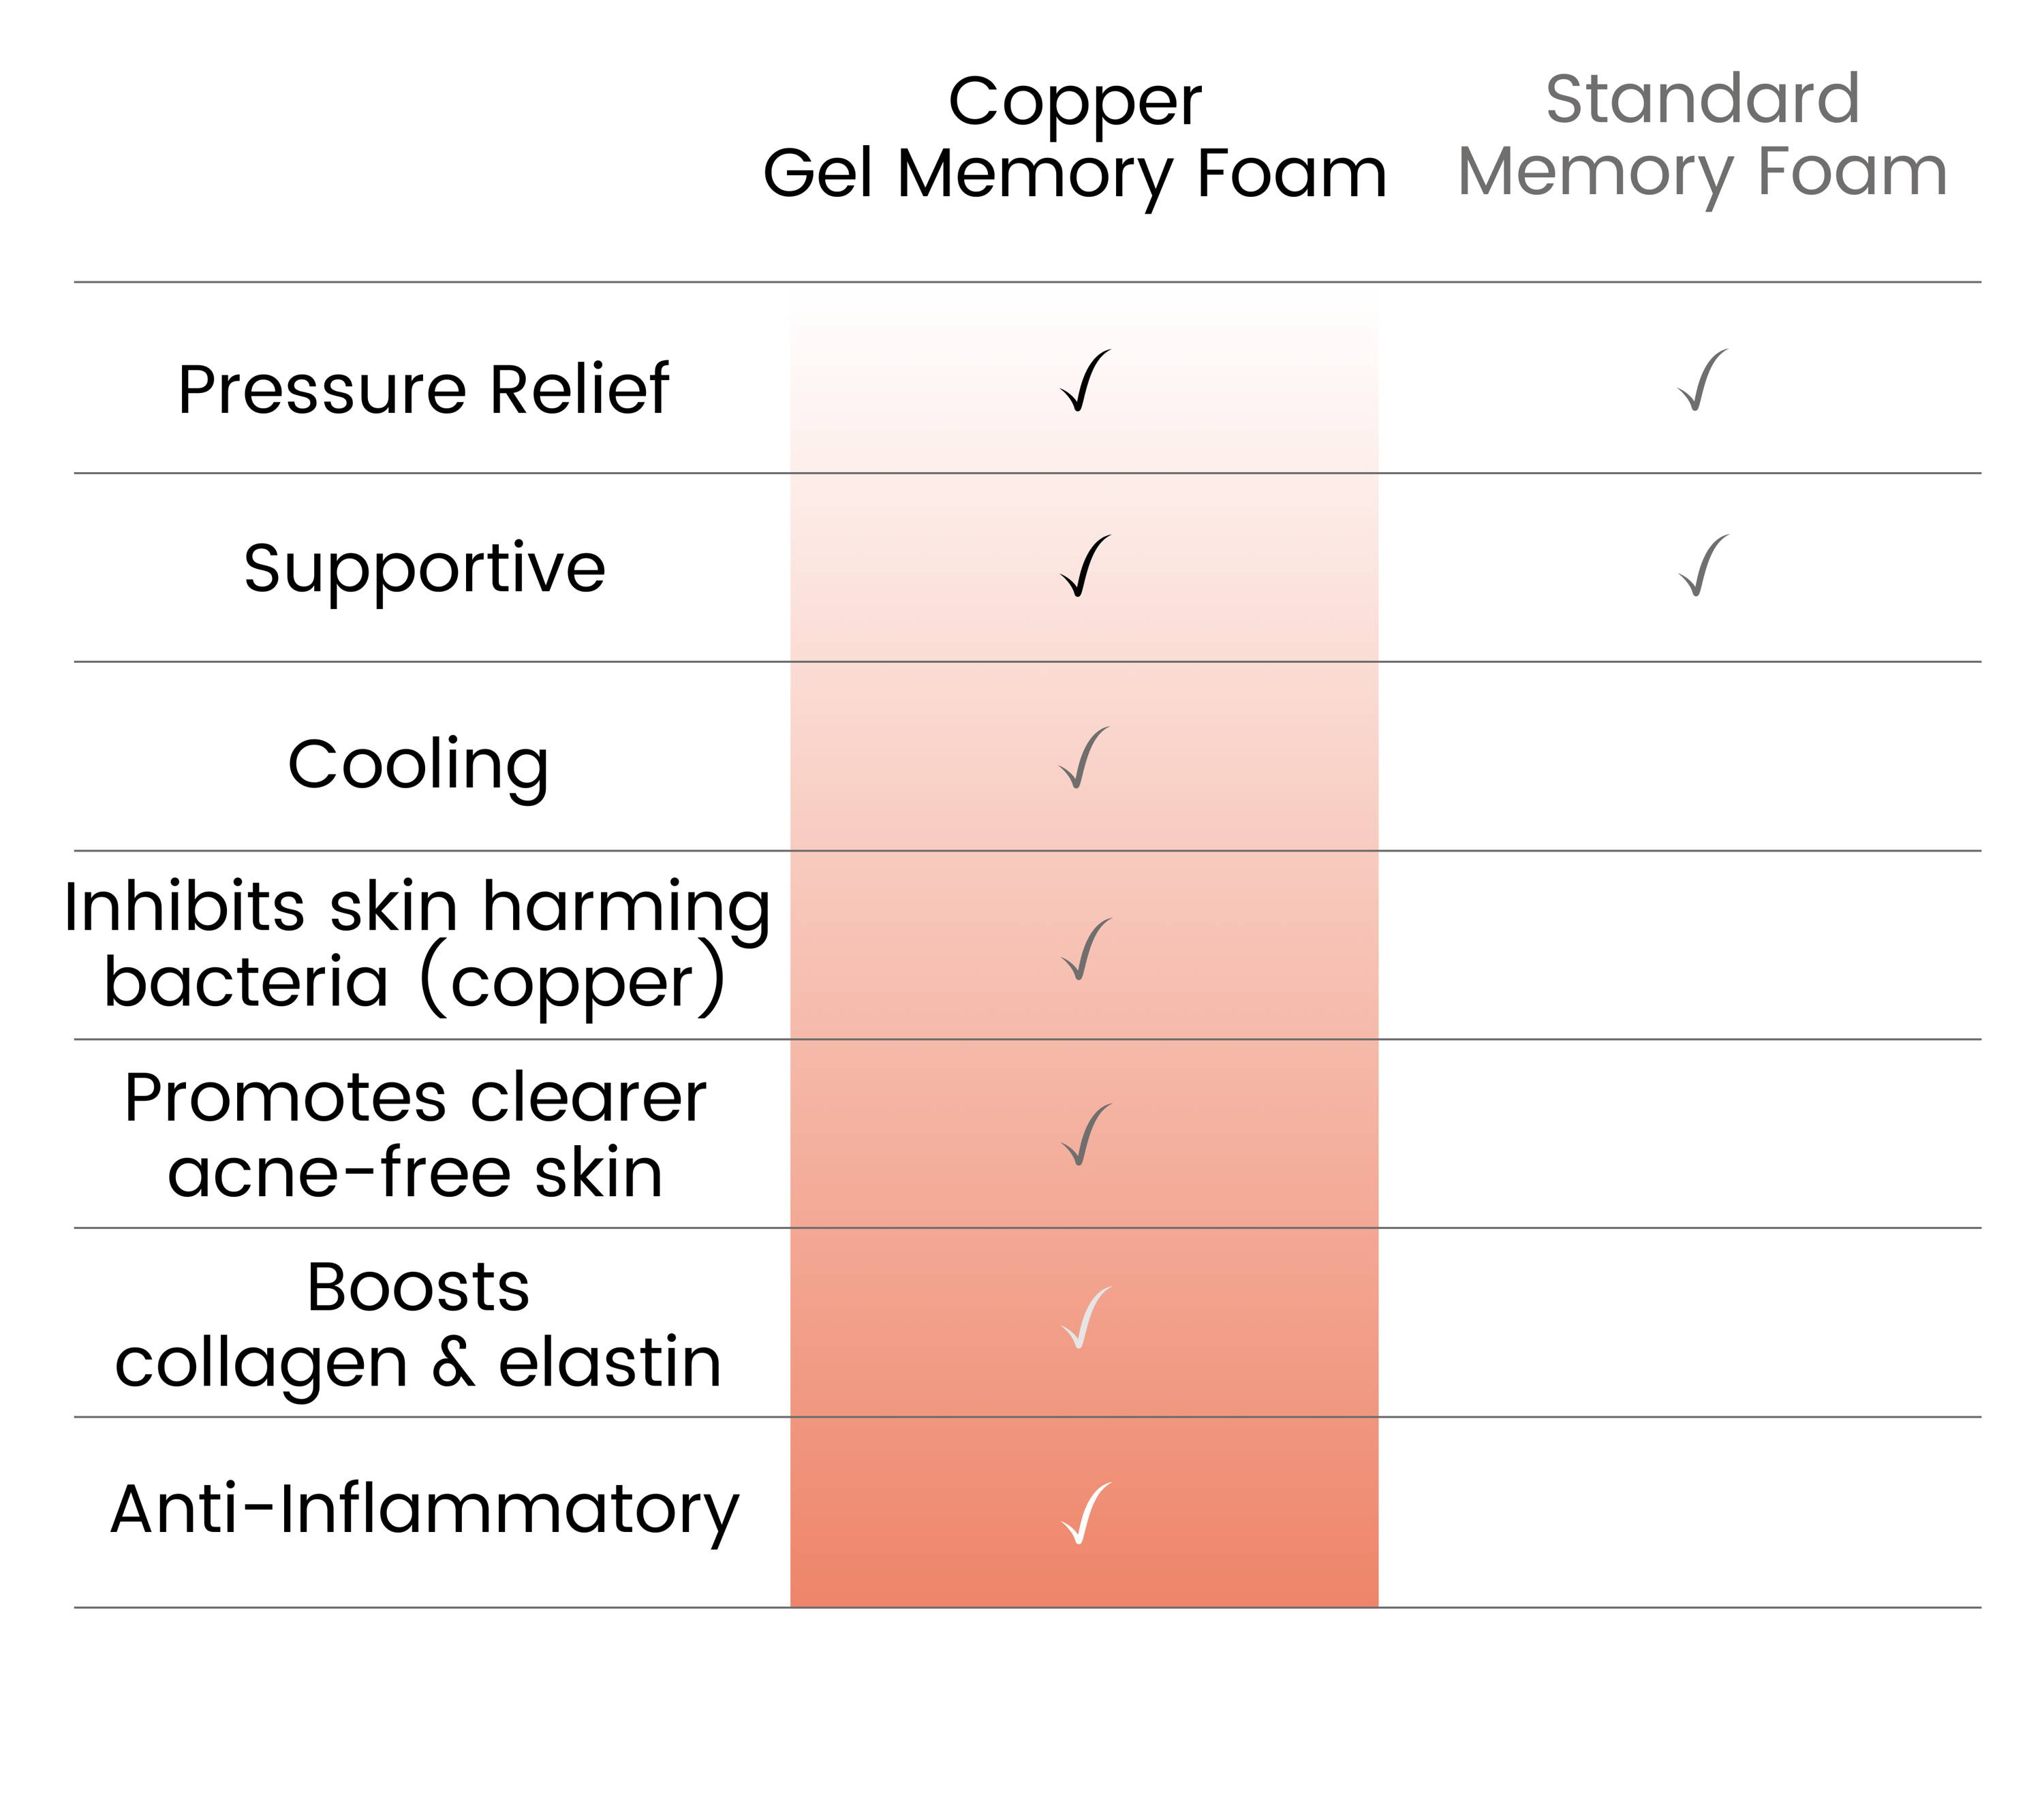 Ergo-Pedic's copper memory foam has the benefits of pressure relief, support, cooling, inhibits bacteria, promotes clearer acne-free skin, boosts collagen and elastin, and is anti-inflammatory.